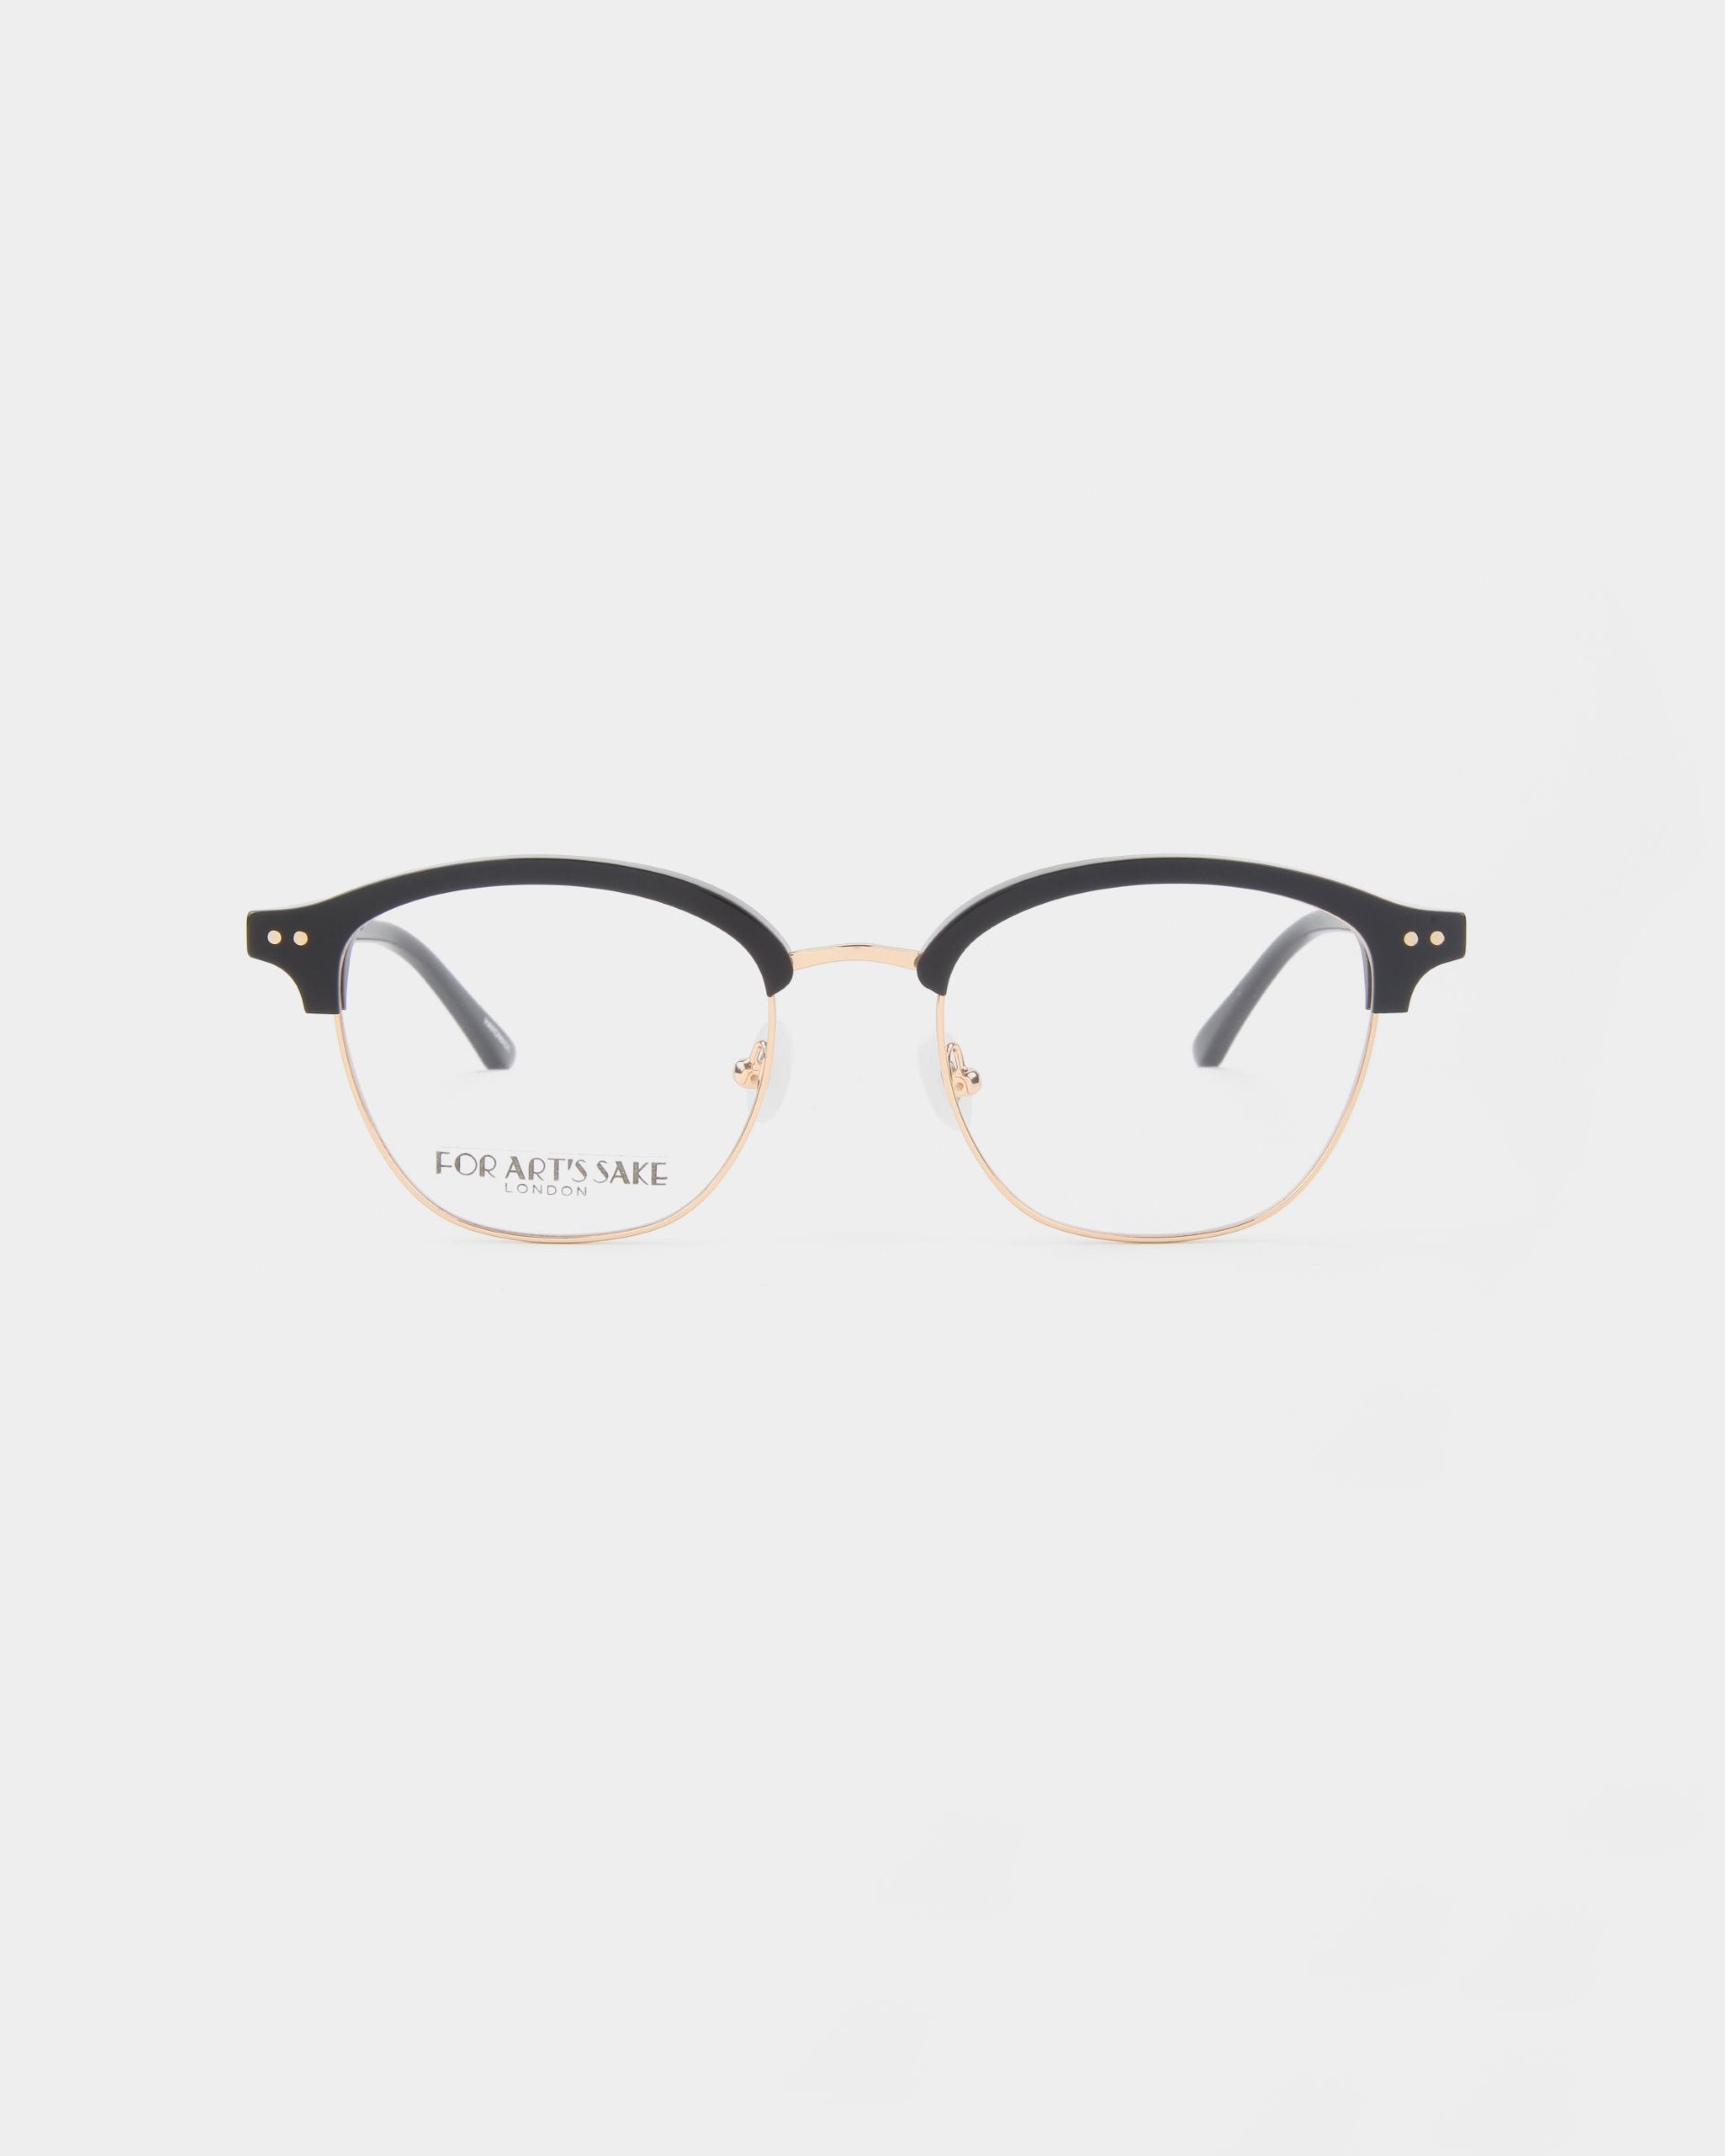 A pair of round Painkiller eyeglasses by For Art's Sake® featuring a thin, gold metal frame with black accents on the top half of the rims and black temple tips. The clear lenses offer a minimalist design with an optional Blue Light Filter for added comfort. The background is plain white.